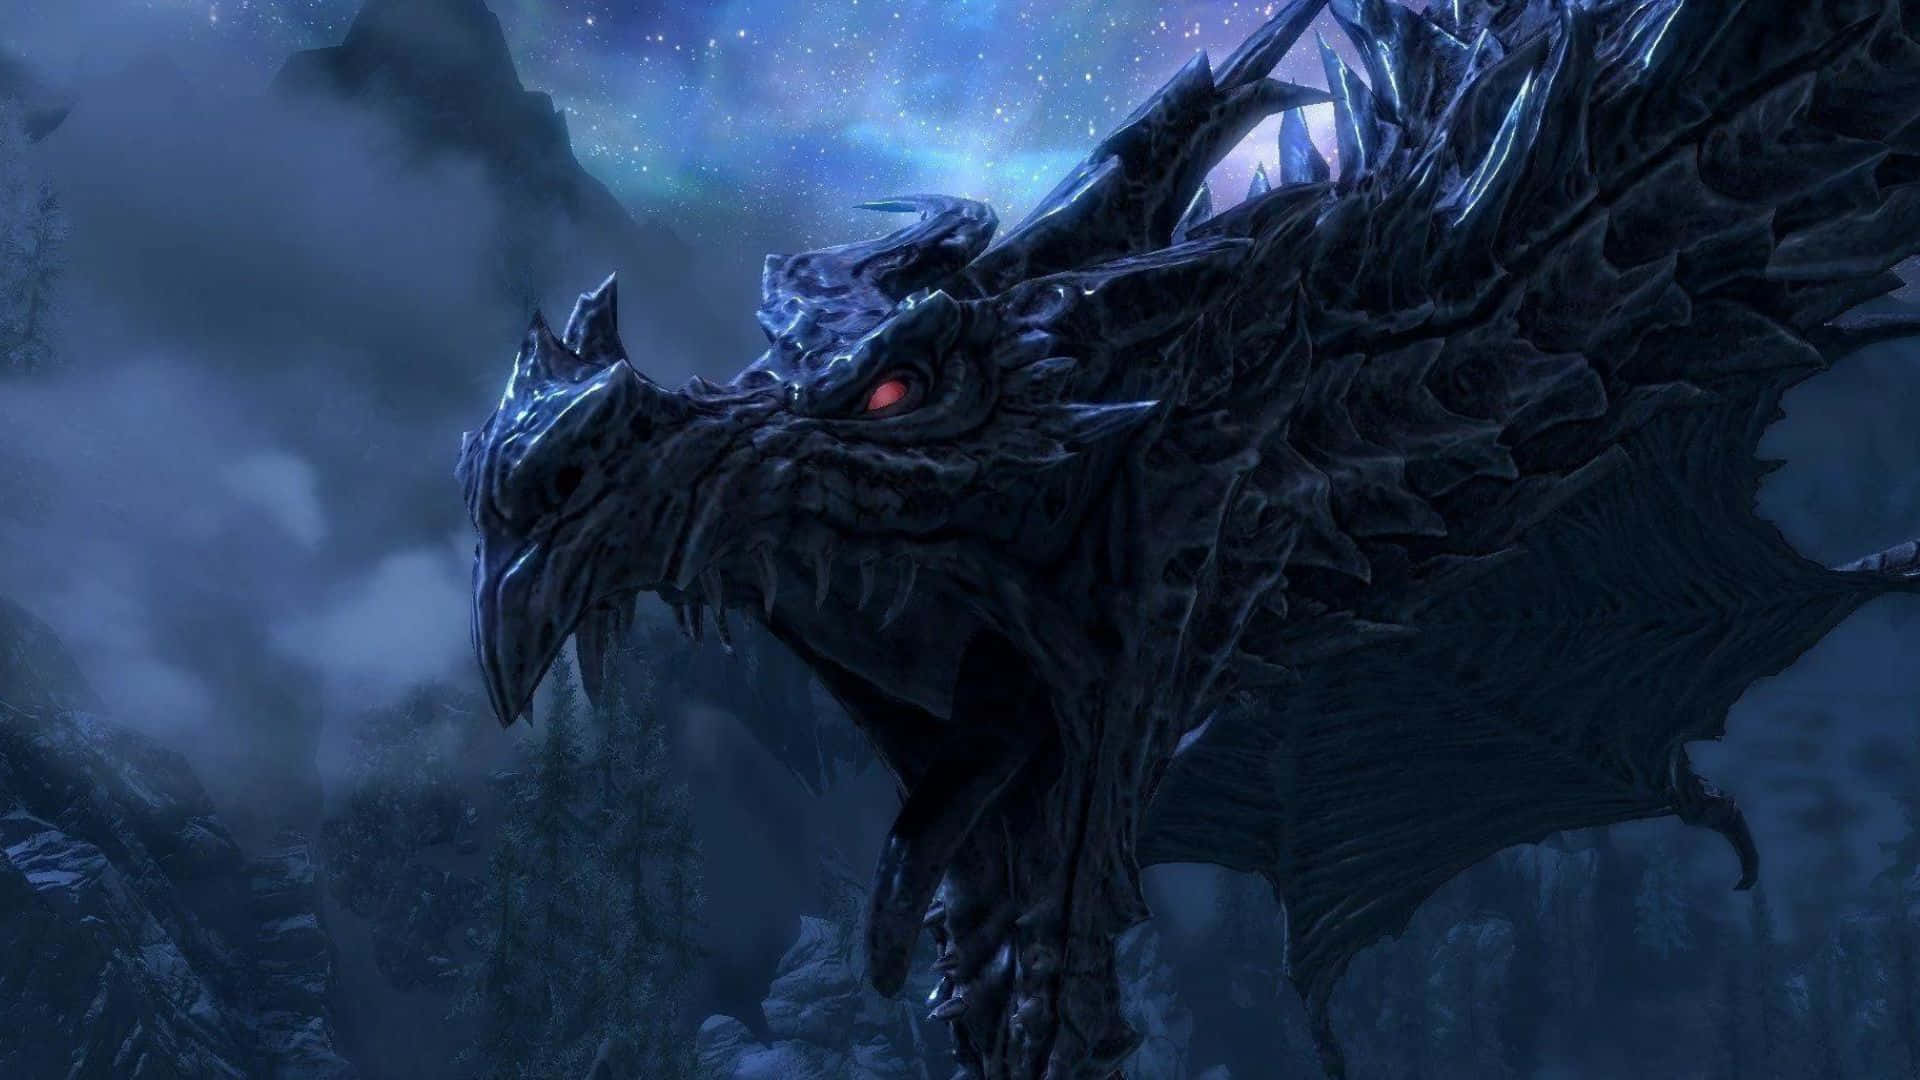 Alduin, the World Eater, soaring above the ancient ruins in Skyrim Wallpaper